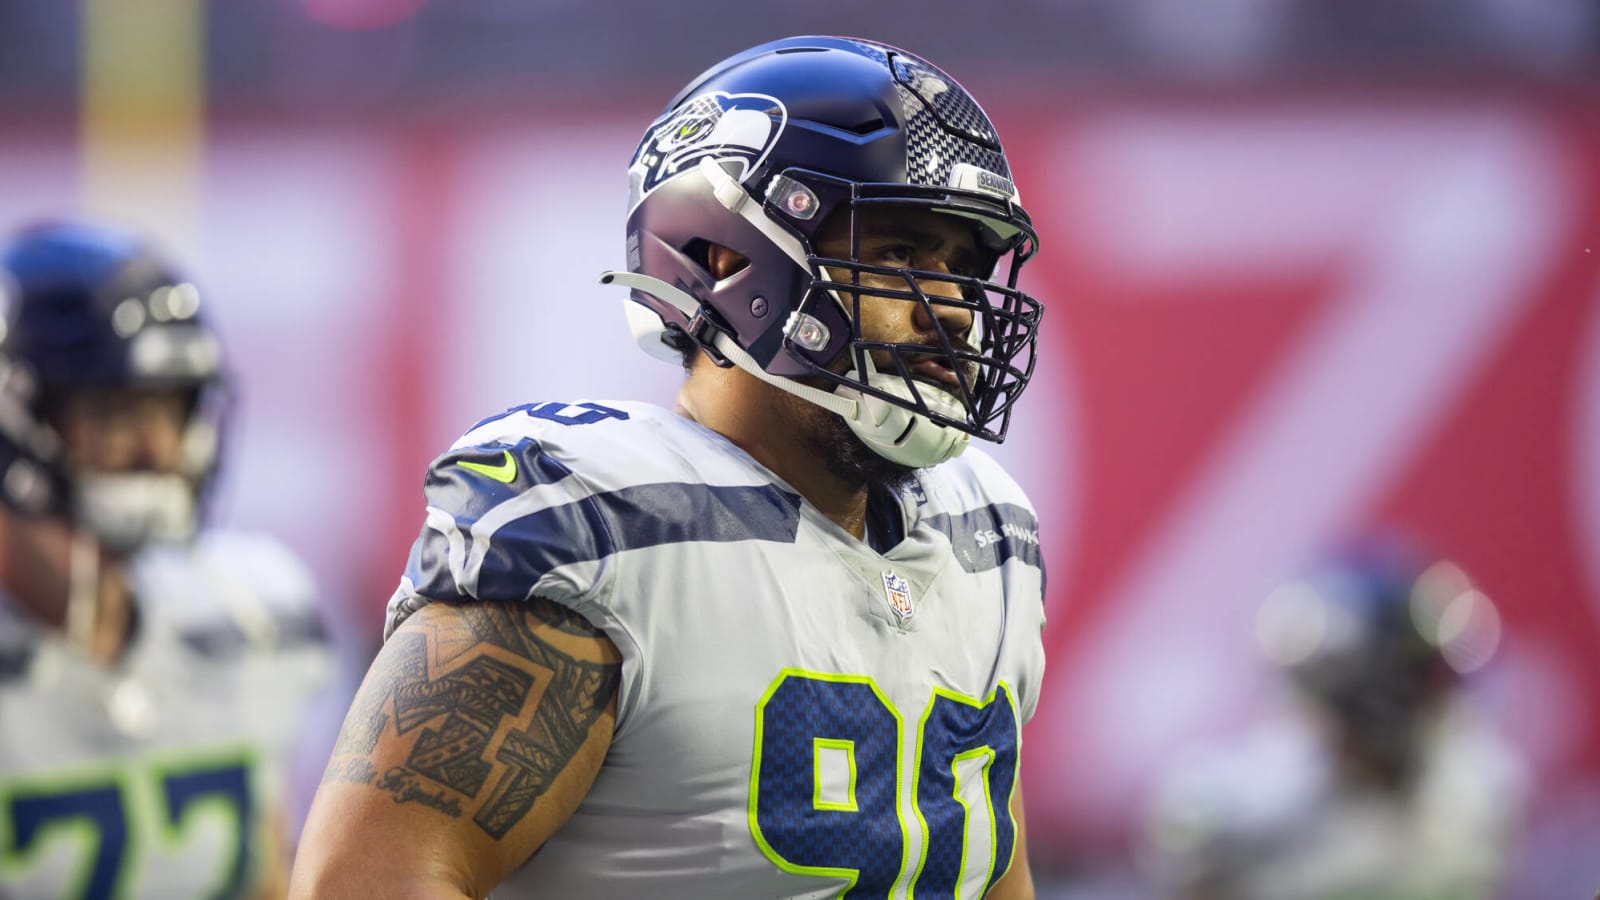 Seahawks likely lose key defensive player for season